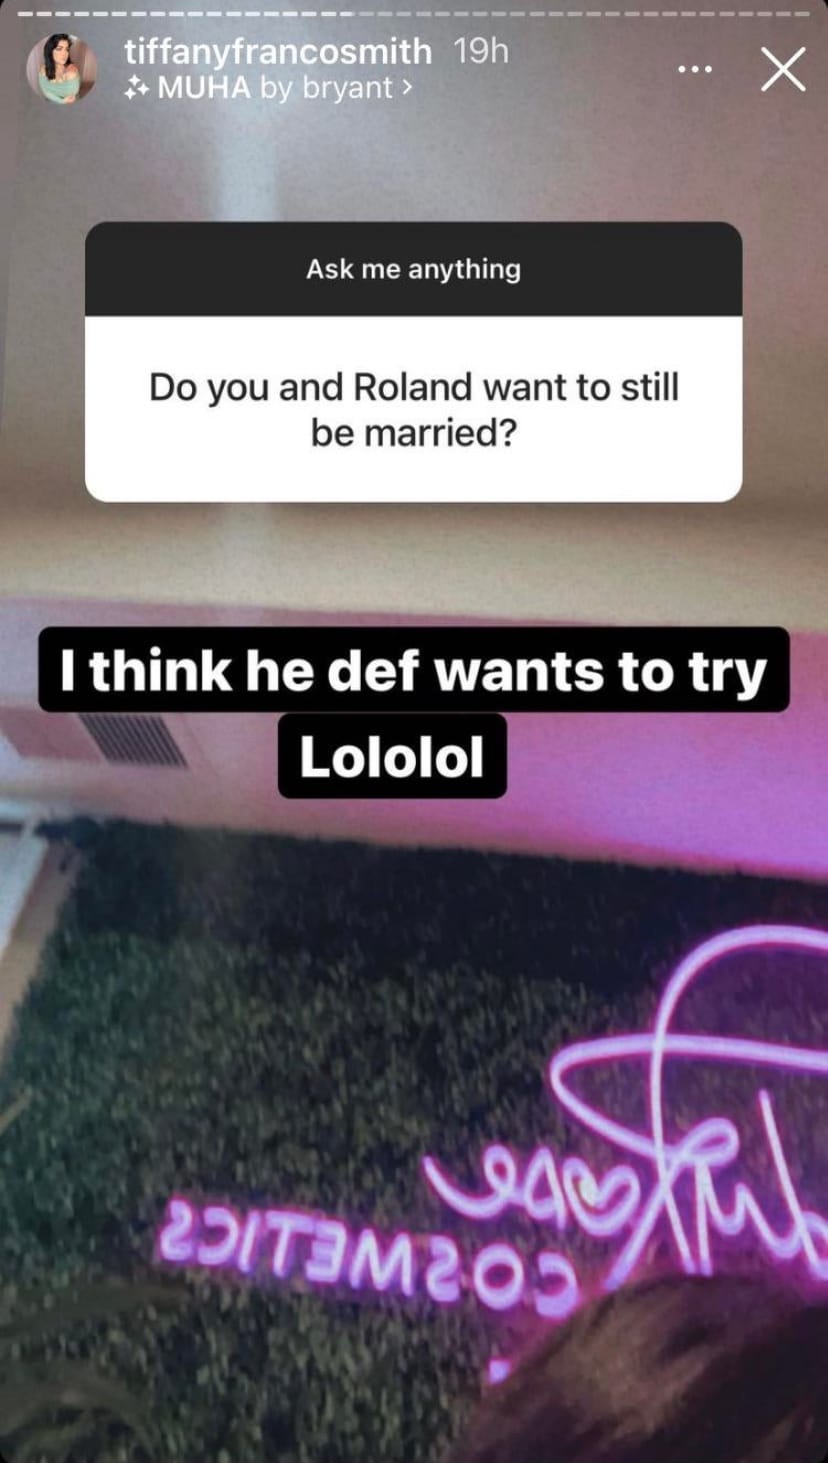 90 Day Fiance's Tiffany Smith responding to question of whether her and Ronald still want to be married